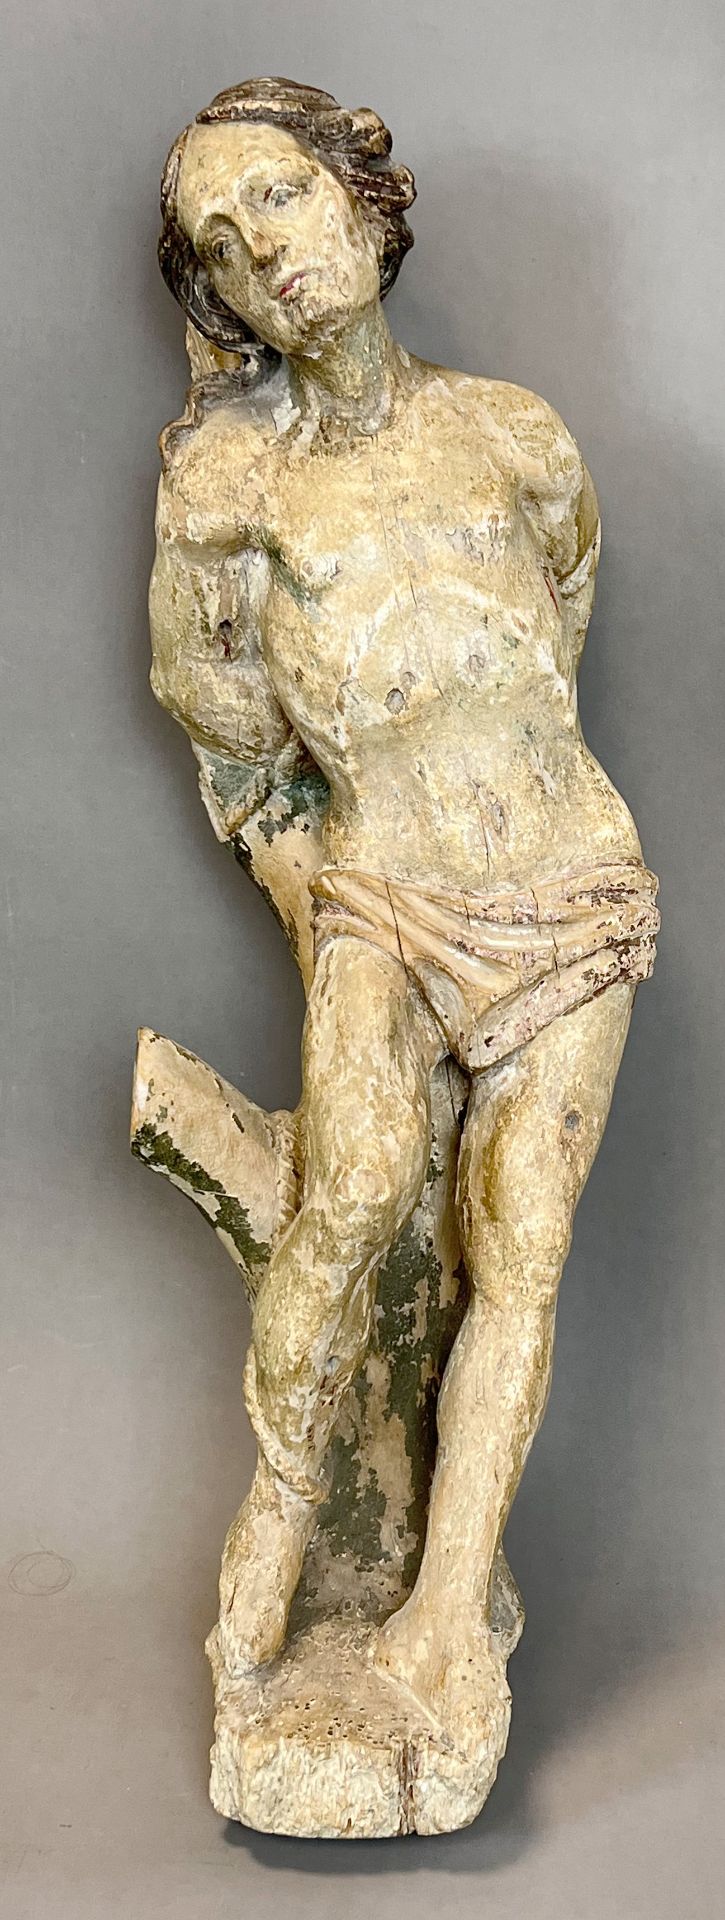 Baroque wooden figure of St Sebastian as a martyr. Southern Germany.